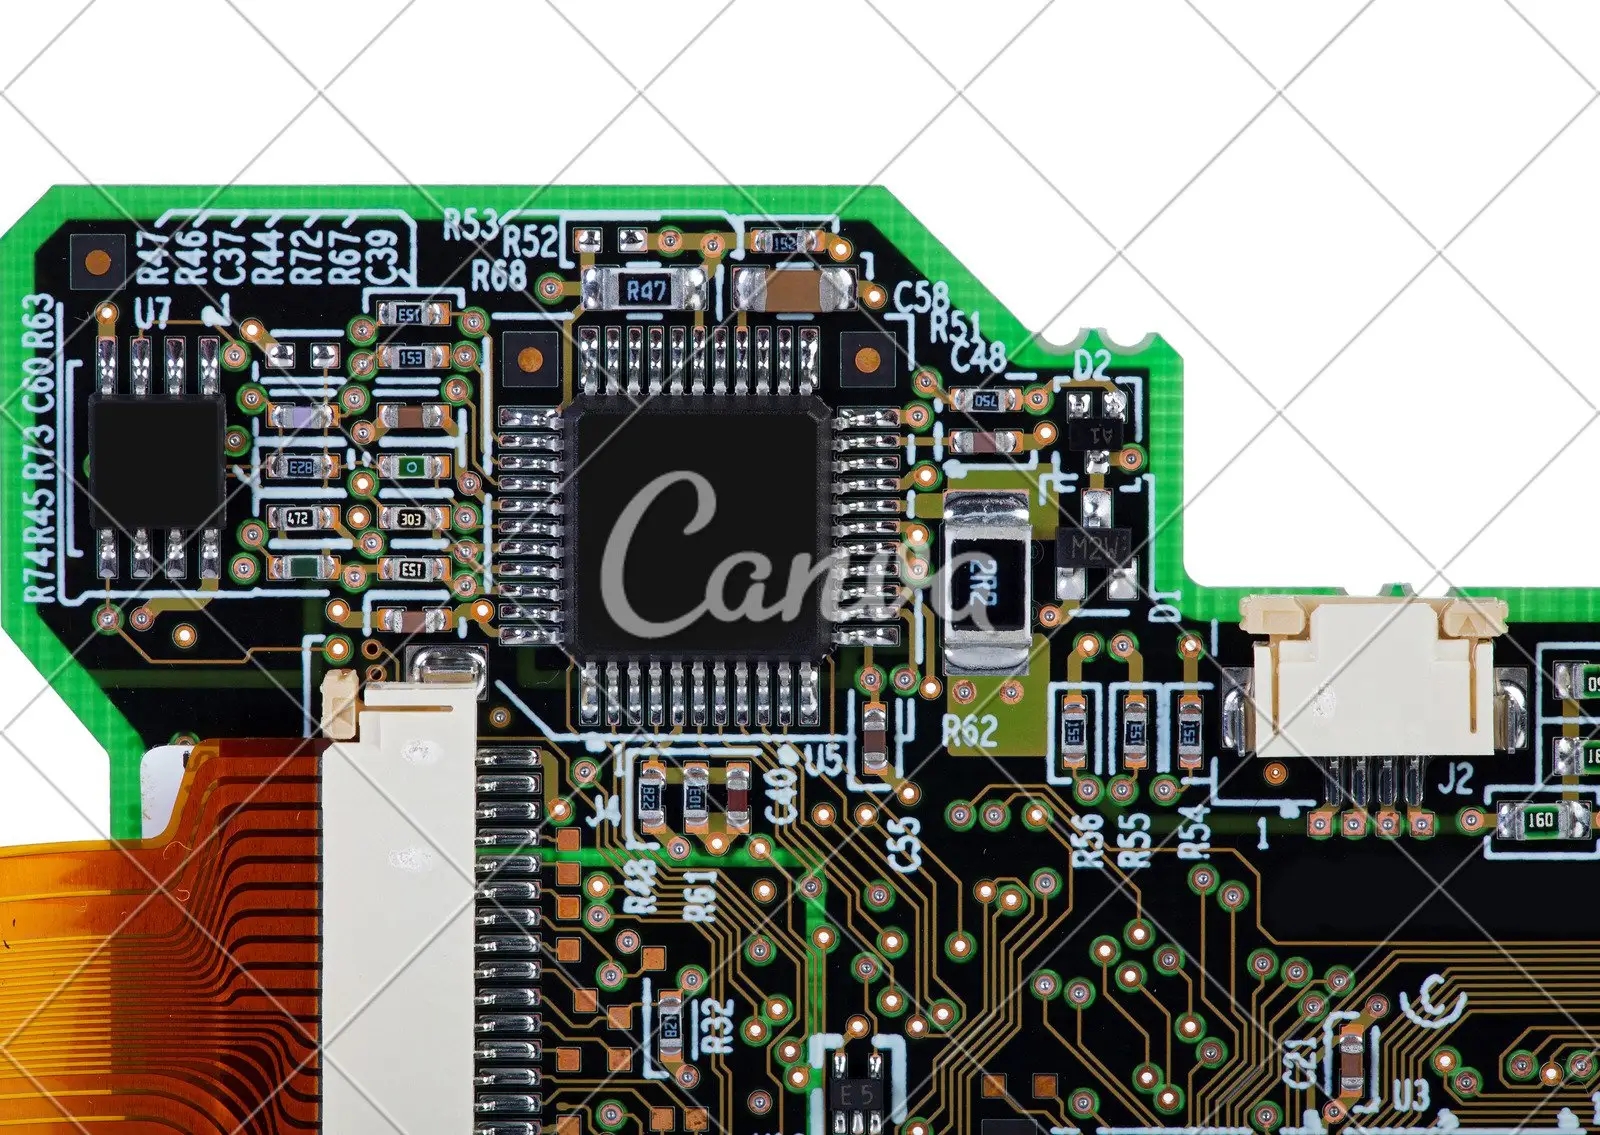 What is a turnkey printed circuit board assembly?